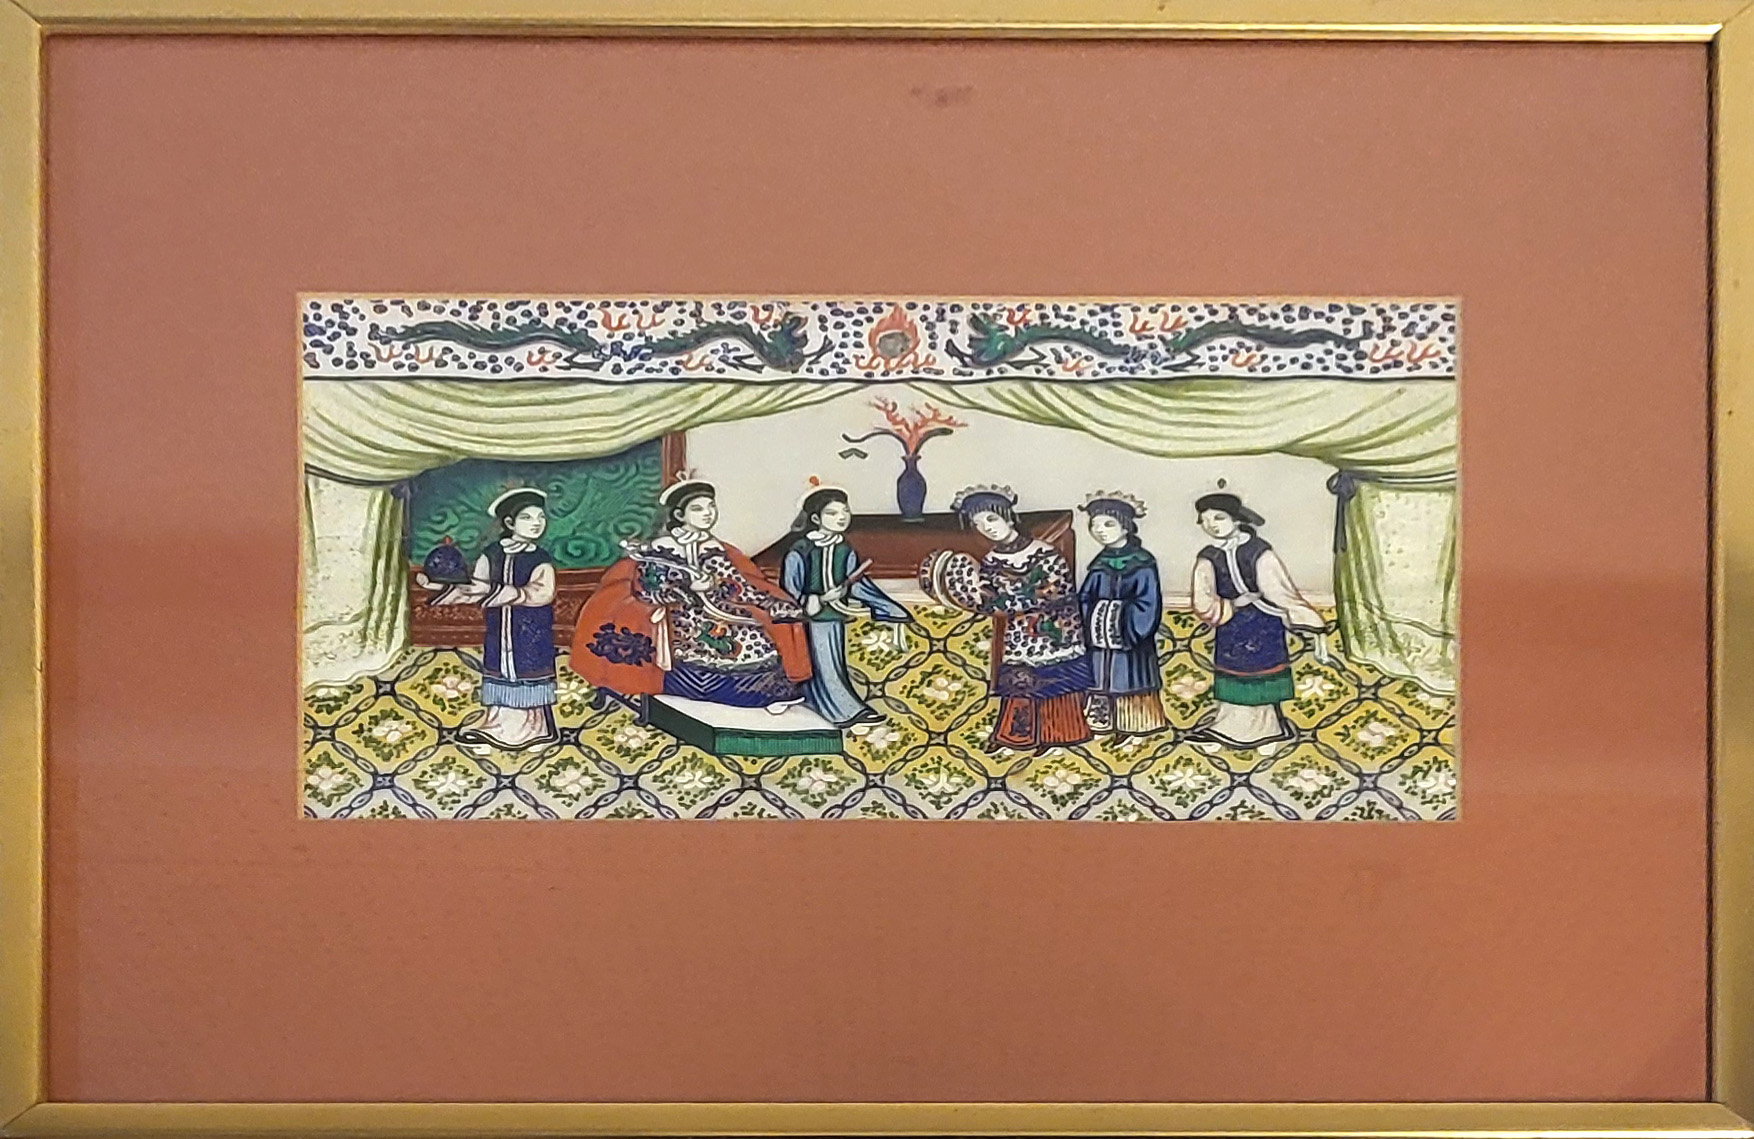 A 20TH CENTURY INDIAN SILK PAINTING, DEPICTING ORNATELY DRESSED NATIVES BATTLING A LION AND TIGER